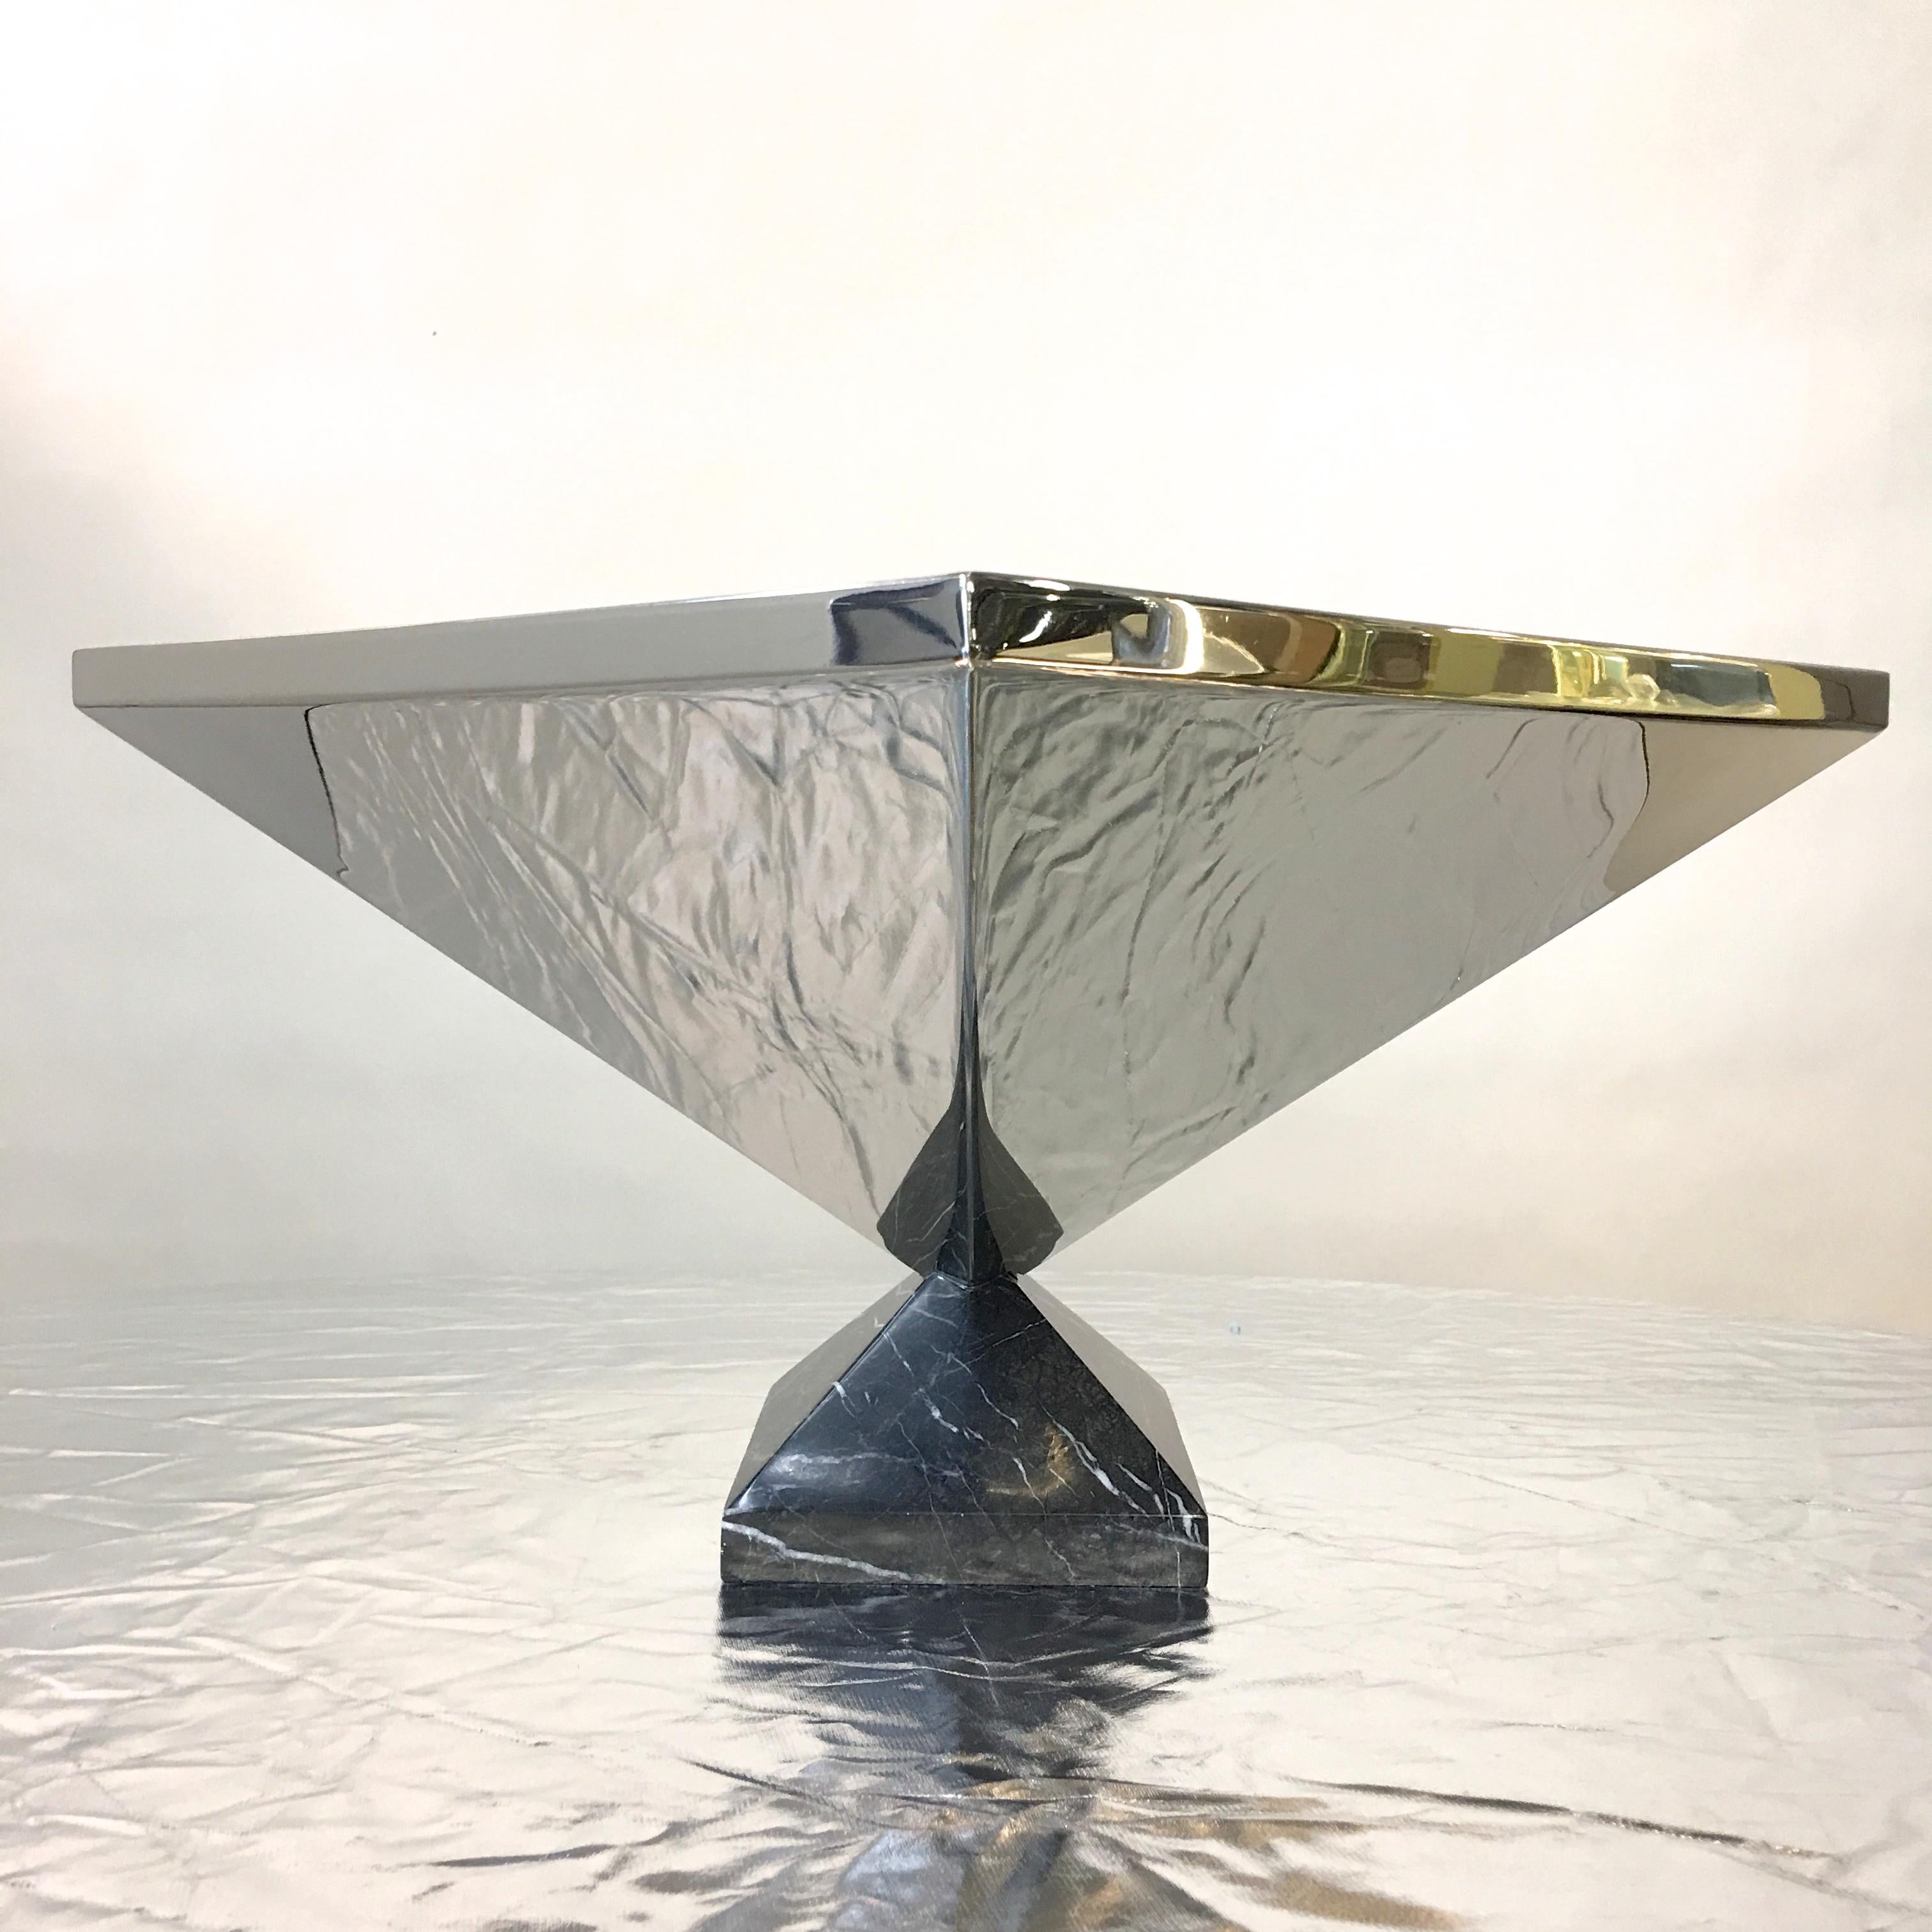 Inverted Pyramid Polished Stainless Centerpiece on Marble Pyramid Base 4